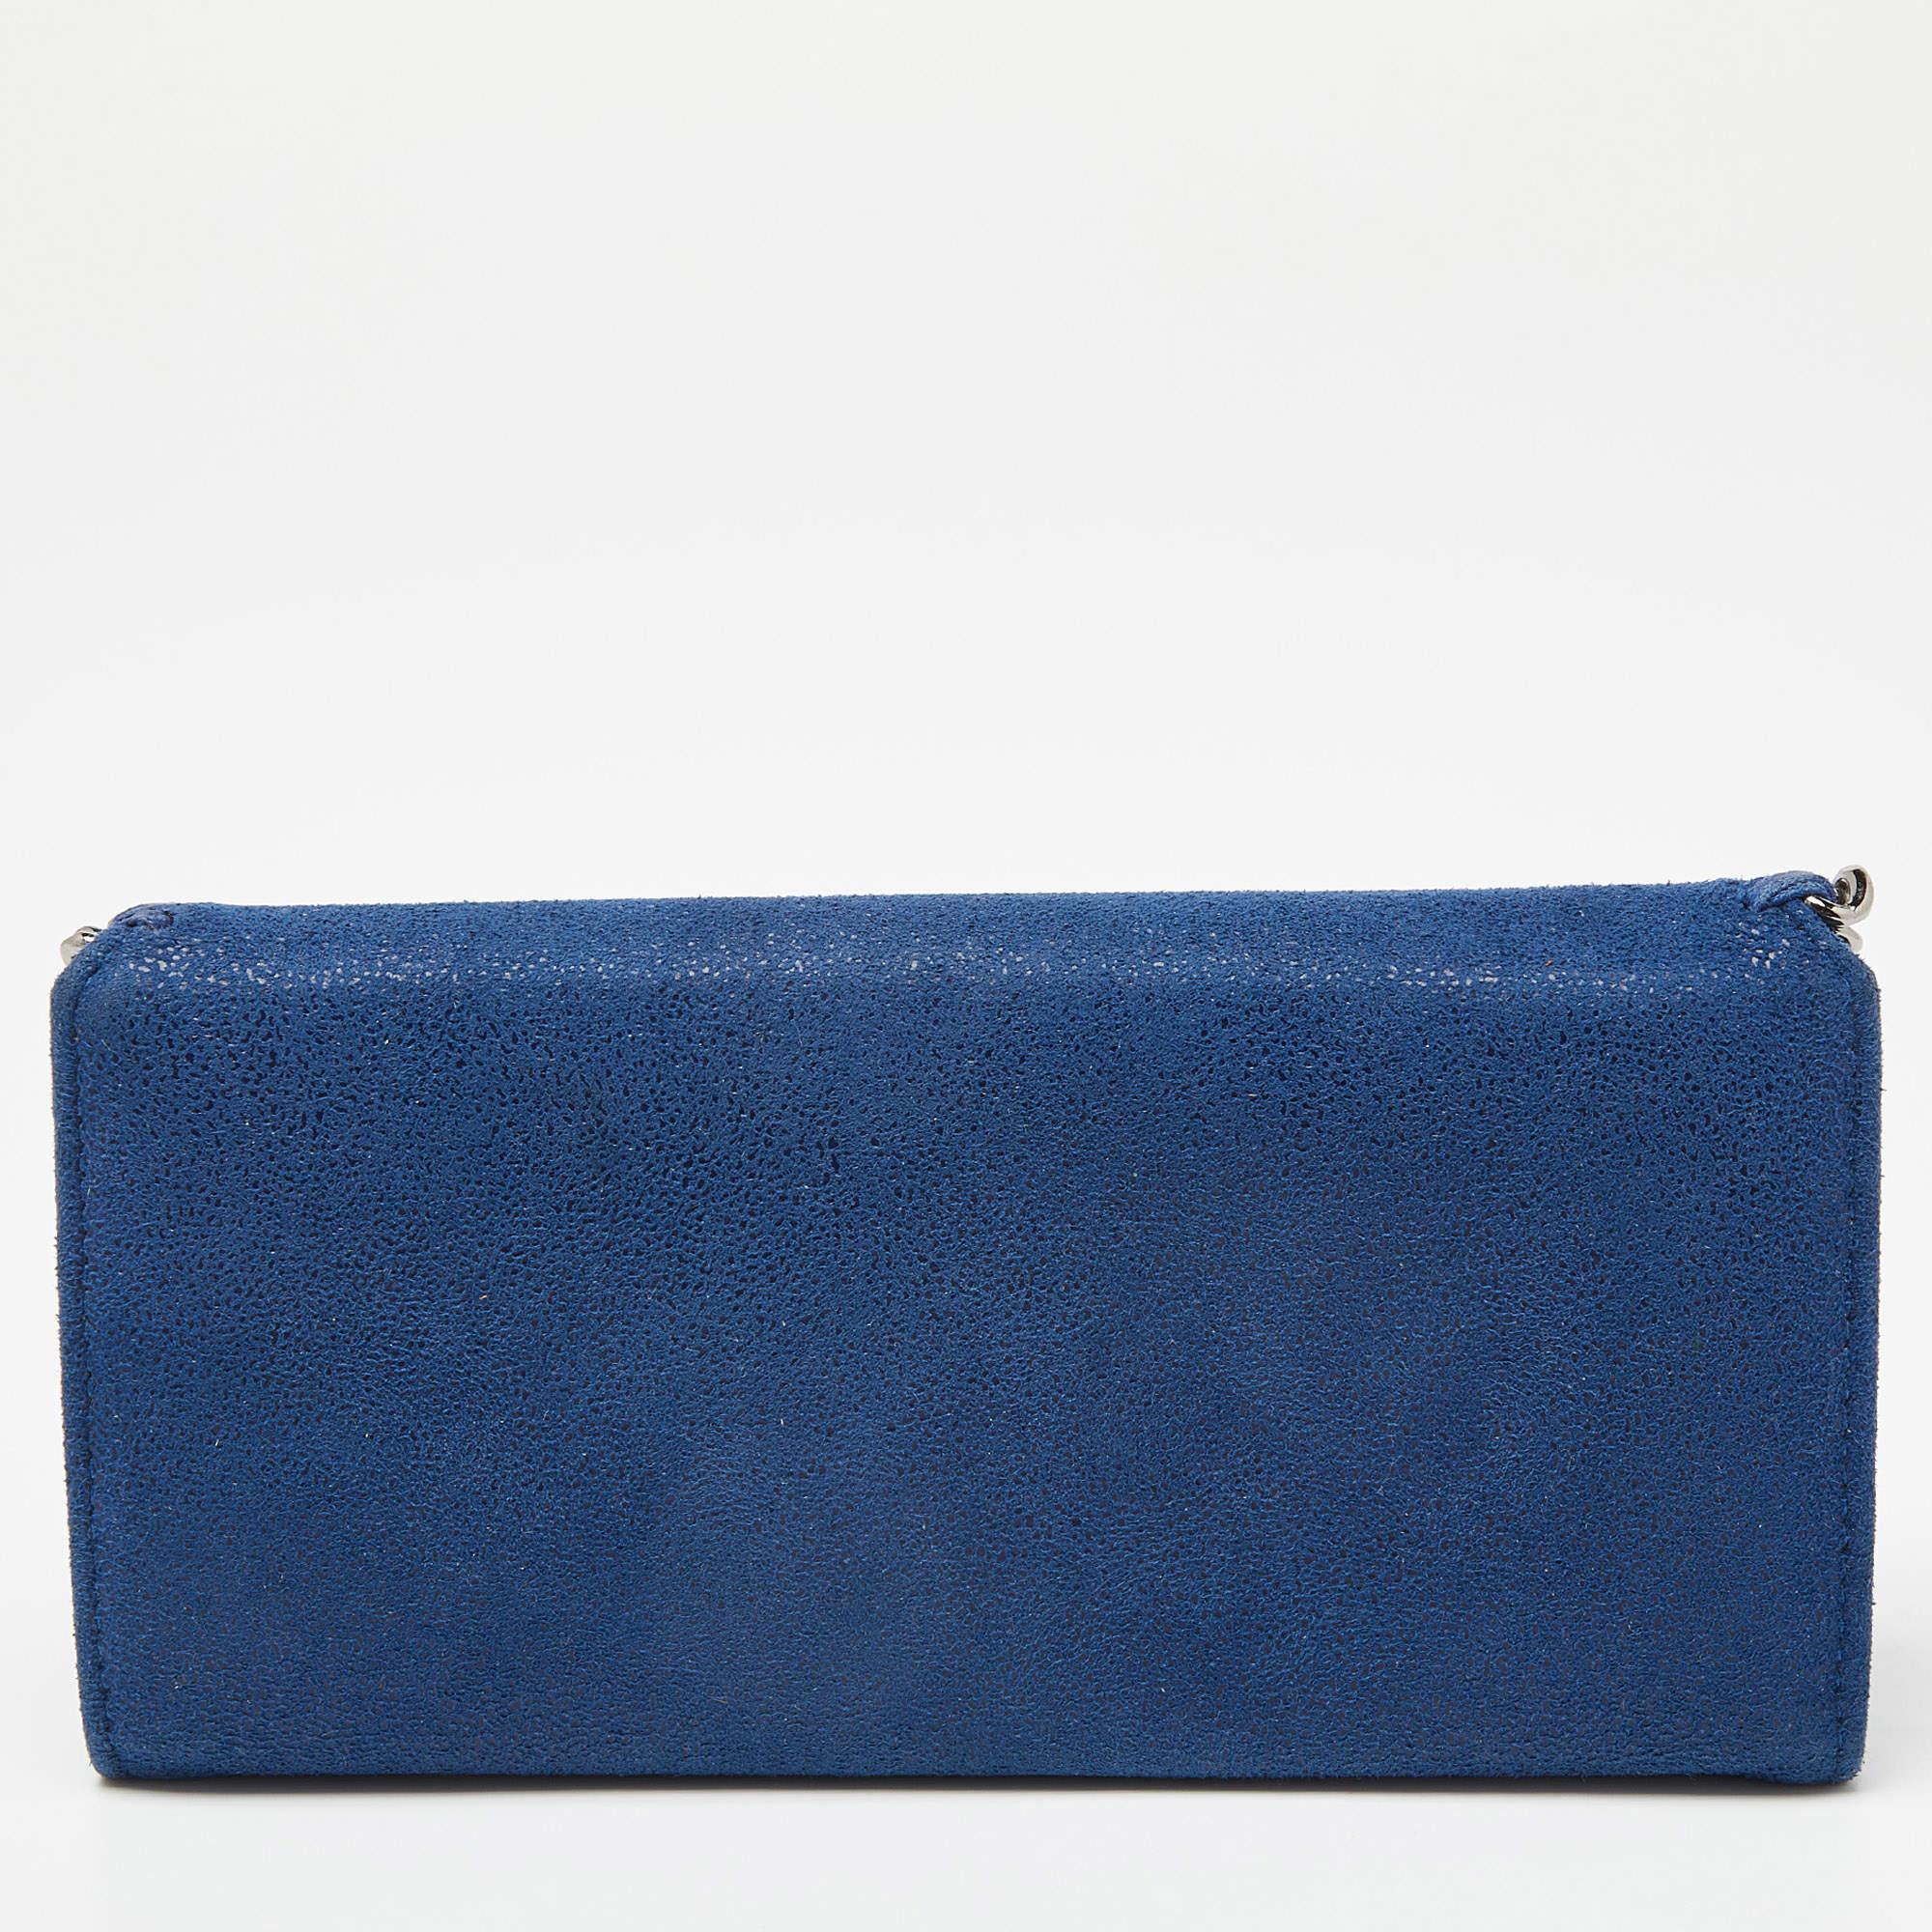 You'll never be tired of carrying this wallet from Stella McCartney because it is brimming with luxurious details. It is crafted from shimmer faux suede and it comes with multiple slots and one zip compartment. Adding to all that, the signature